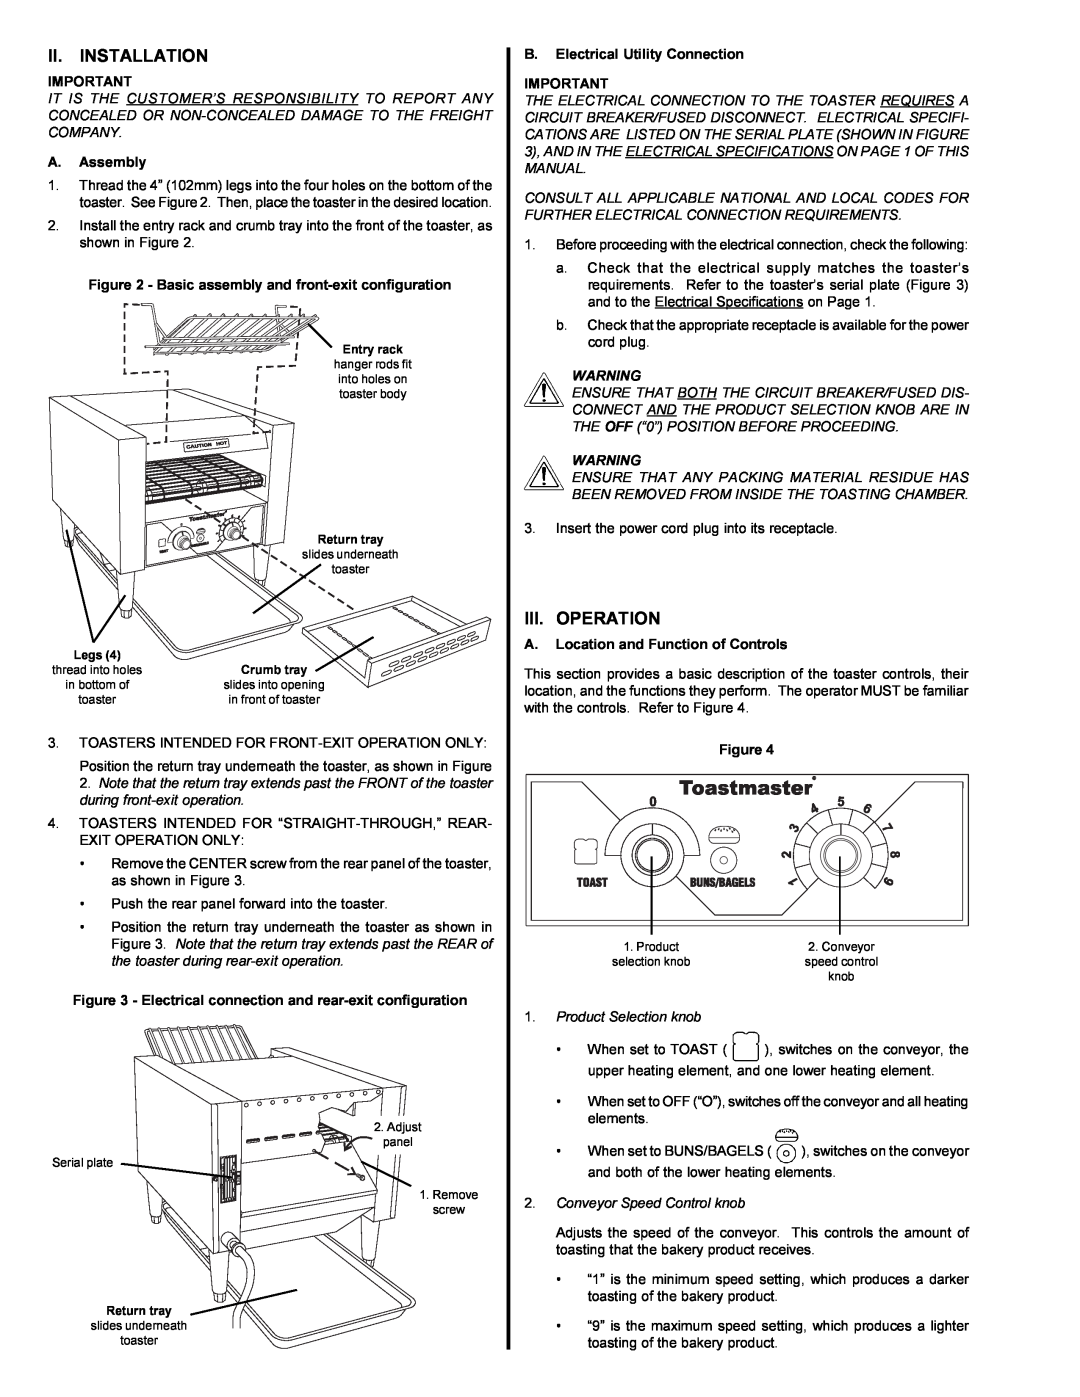 Toastmaster TC18, TC14 installation manual Ii. Installation, Iii. Operation, A.Assembly, B.Electrical Utility Connection 